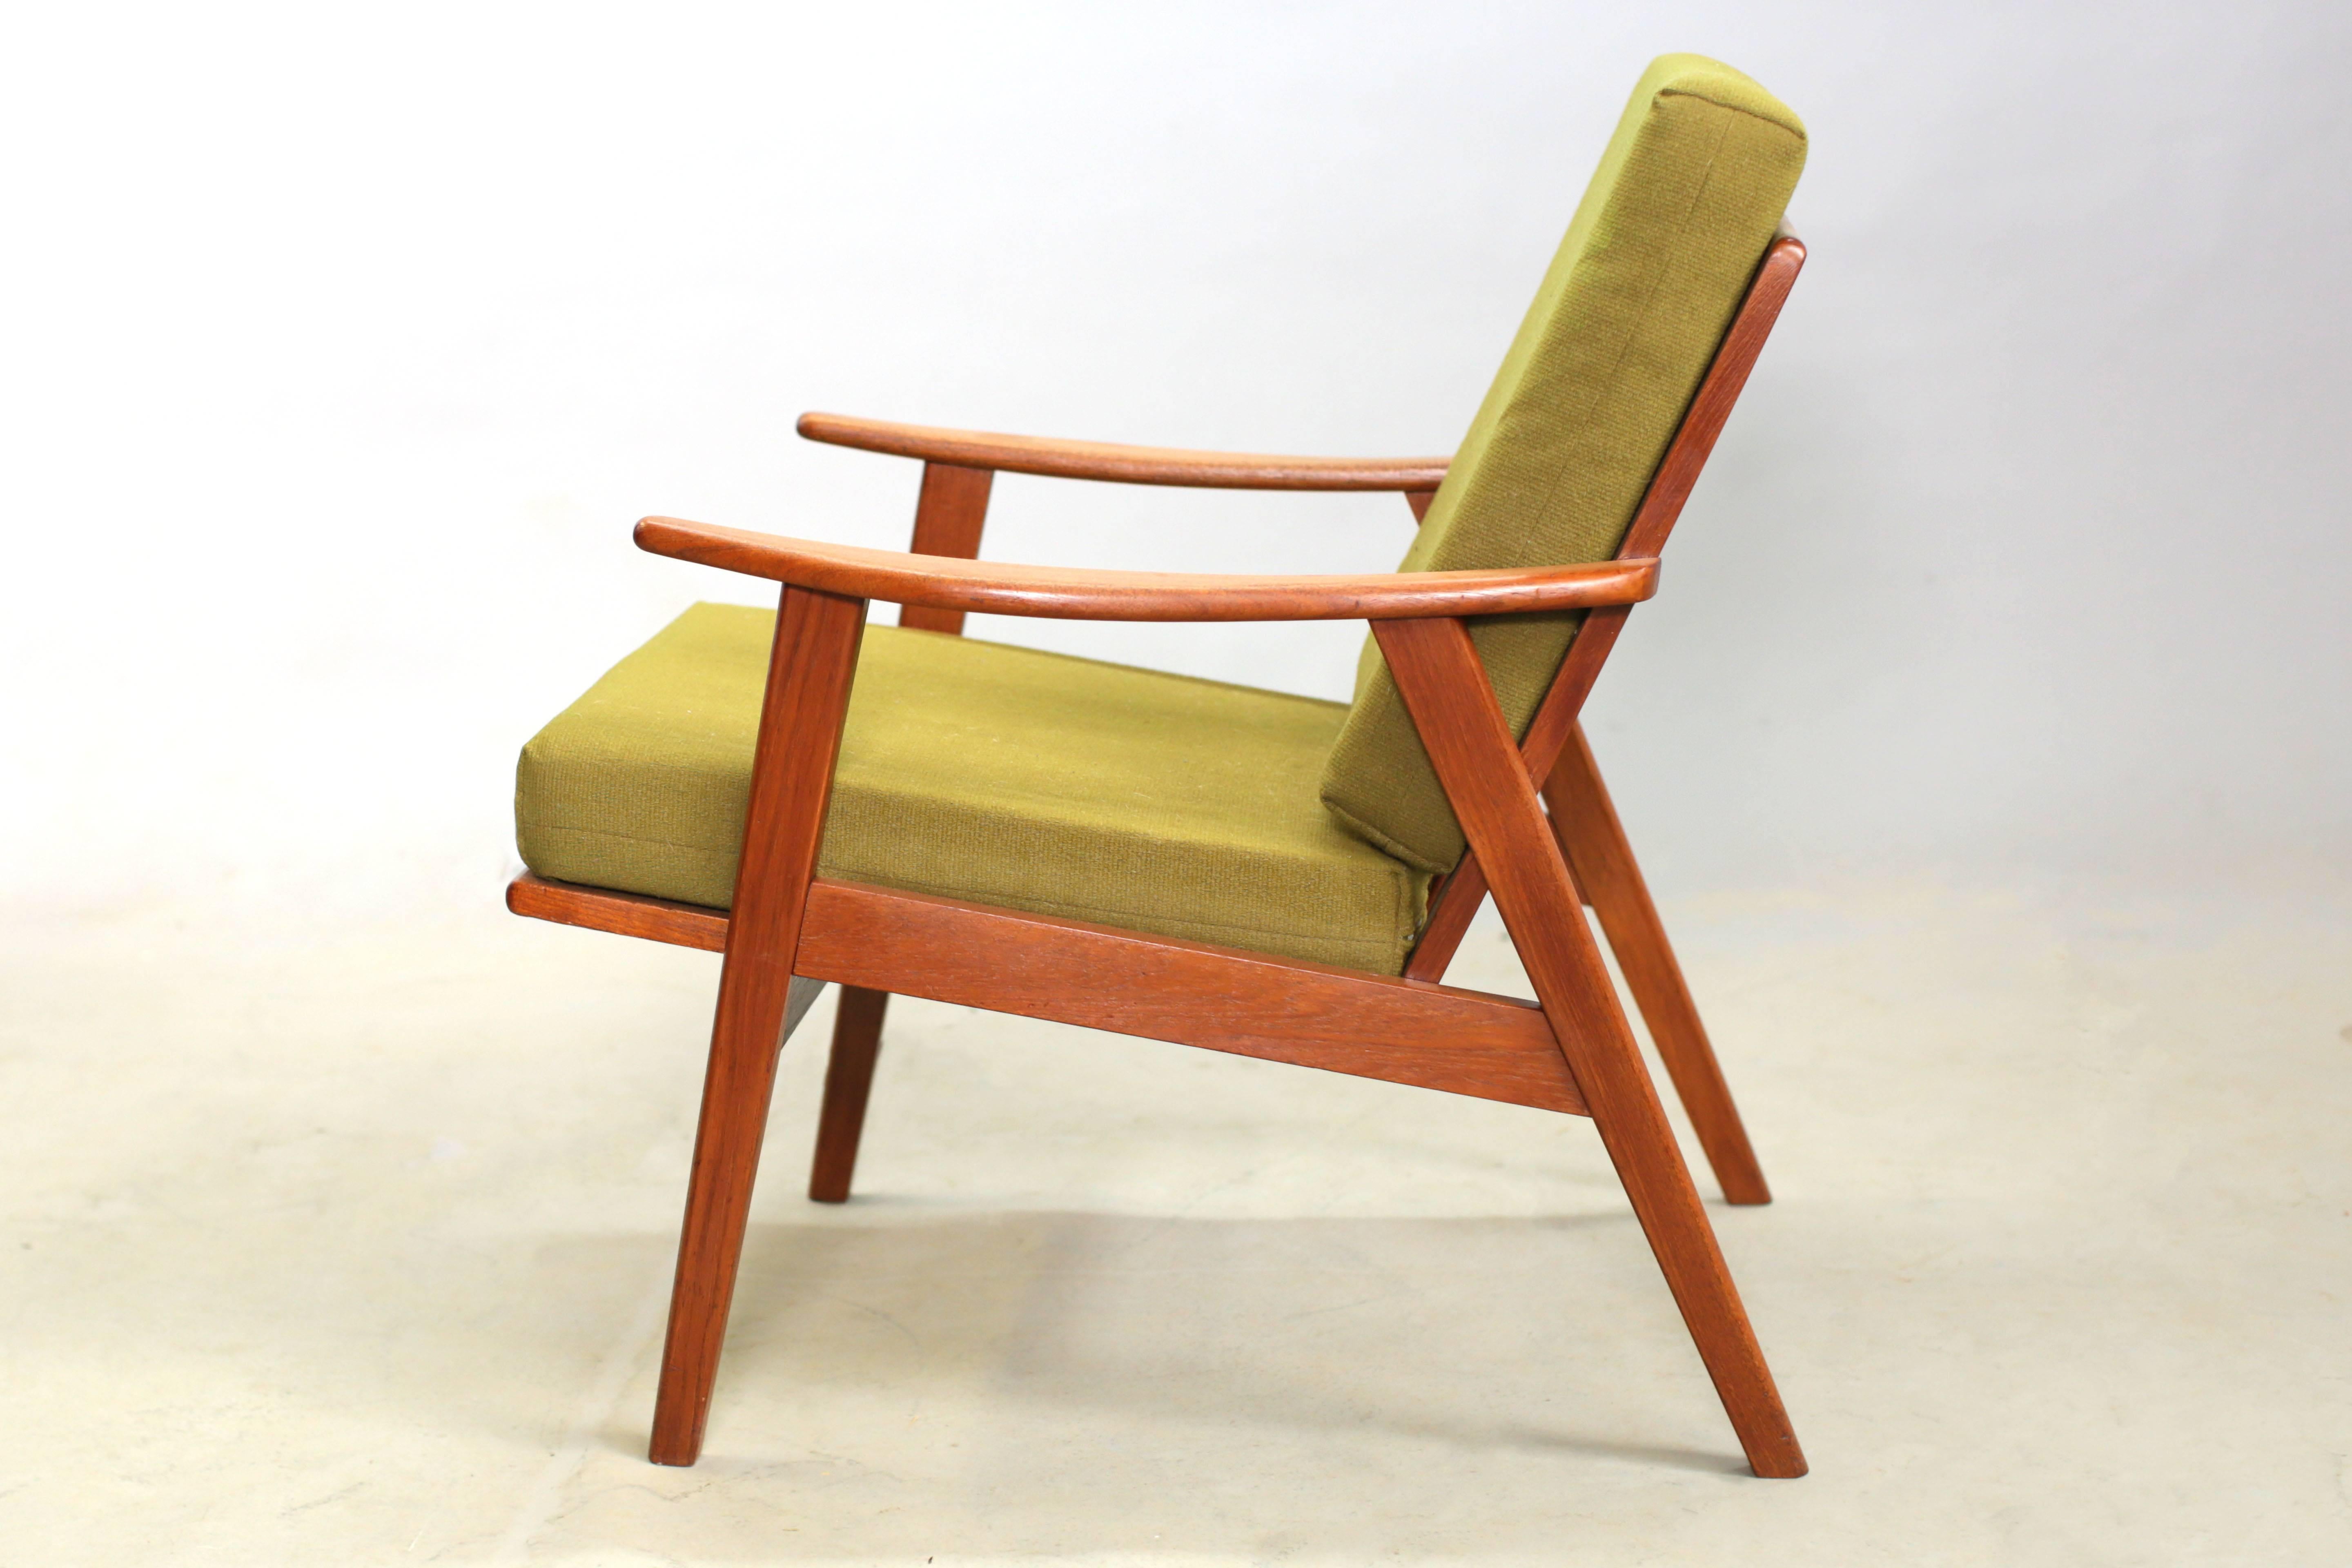 Vintage, 1950s Danish Modern Arm Chair

This wood framed chair is in excellent condition but the fabric needs to be changed. Luckily we offer upholstery services so choose your fabric, any fabric and we'll get it set up for you. Ready for pick up